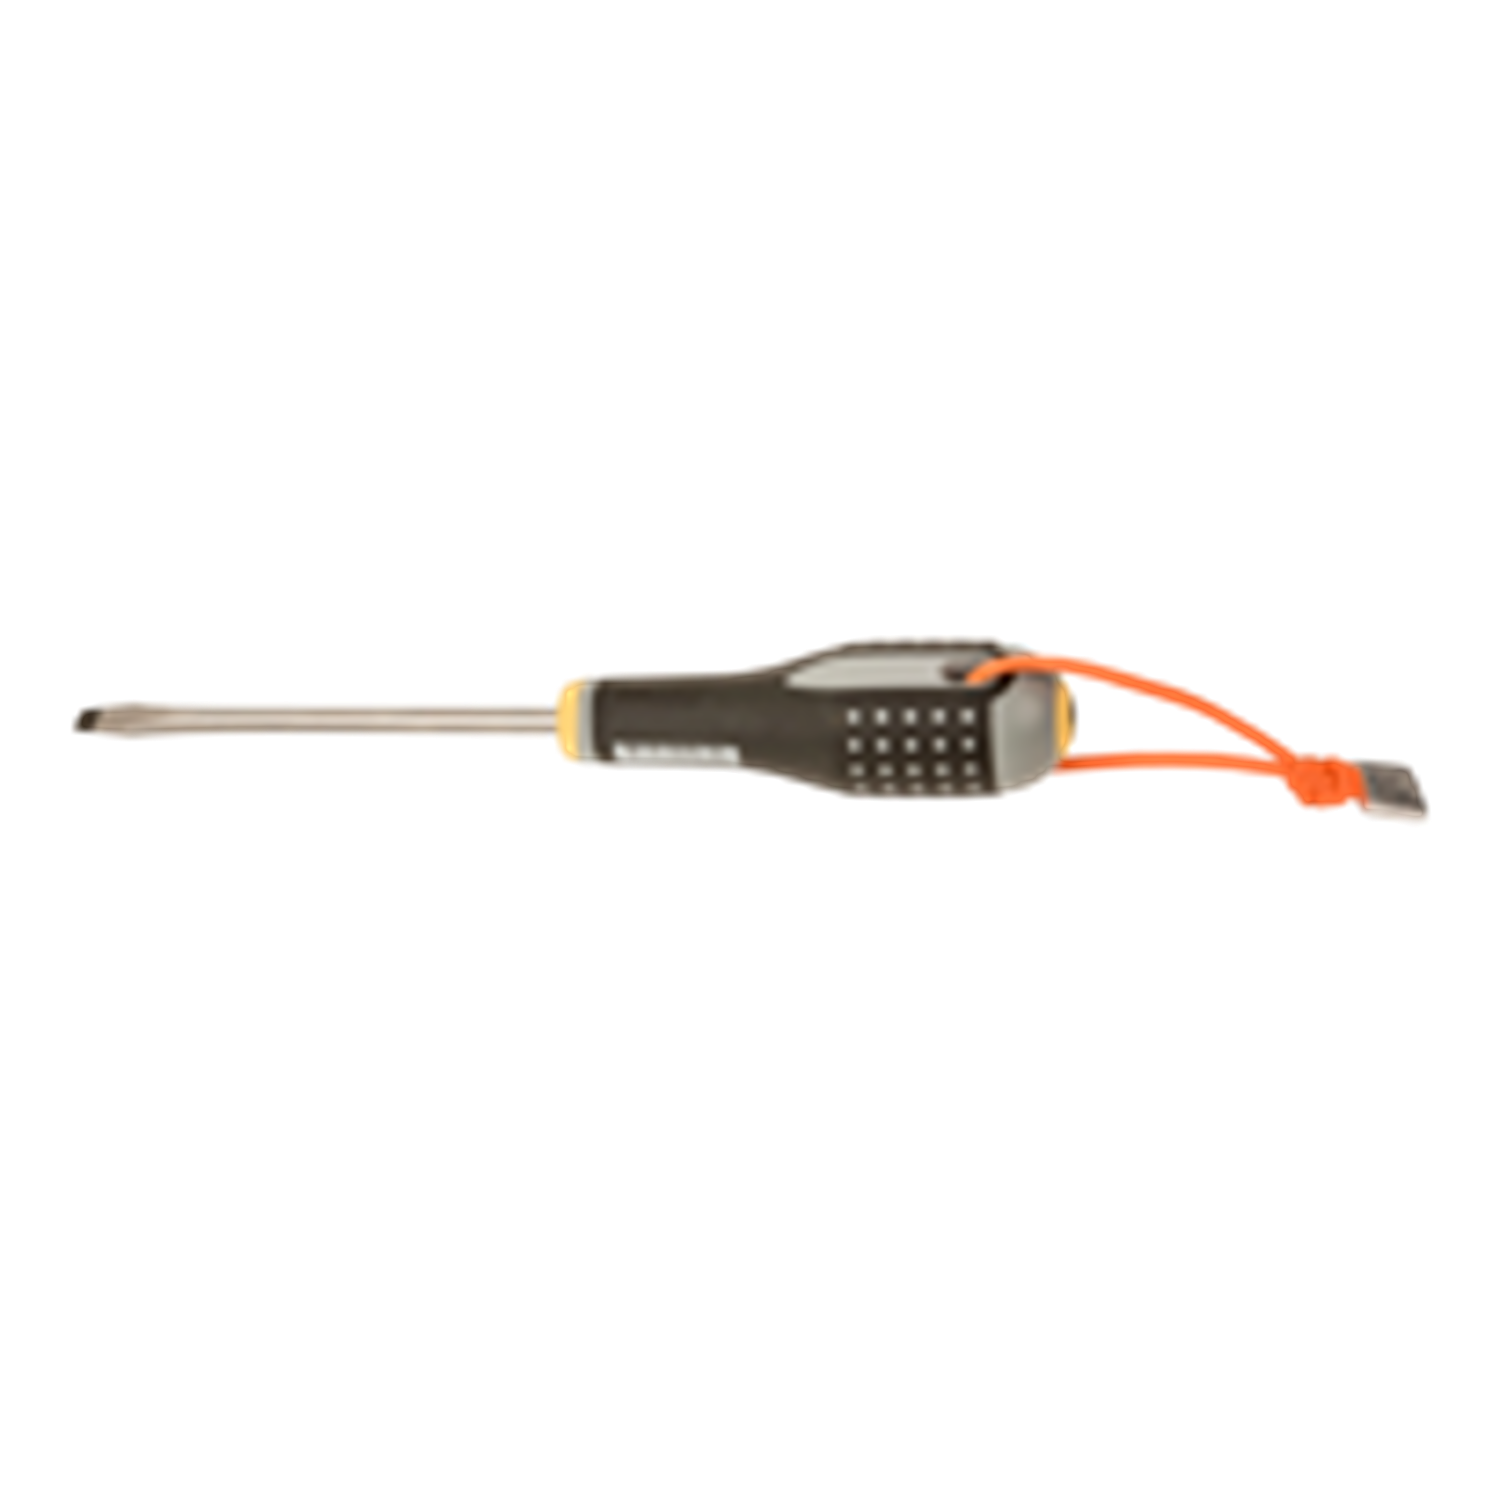 BAHCO TAHBE8155 ERGO Slotted Screwdriver with Dyneema String - Premium Slotted Screwdriver from BAHCO - Shop now at Yew Aik.